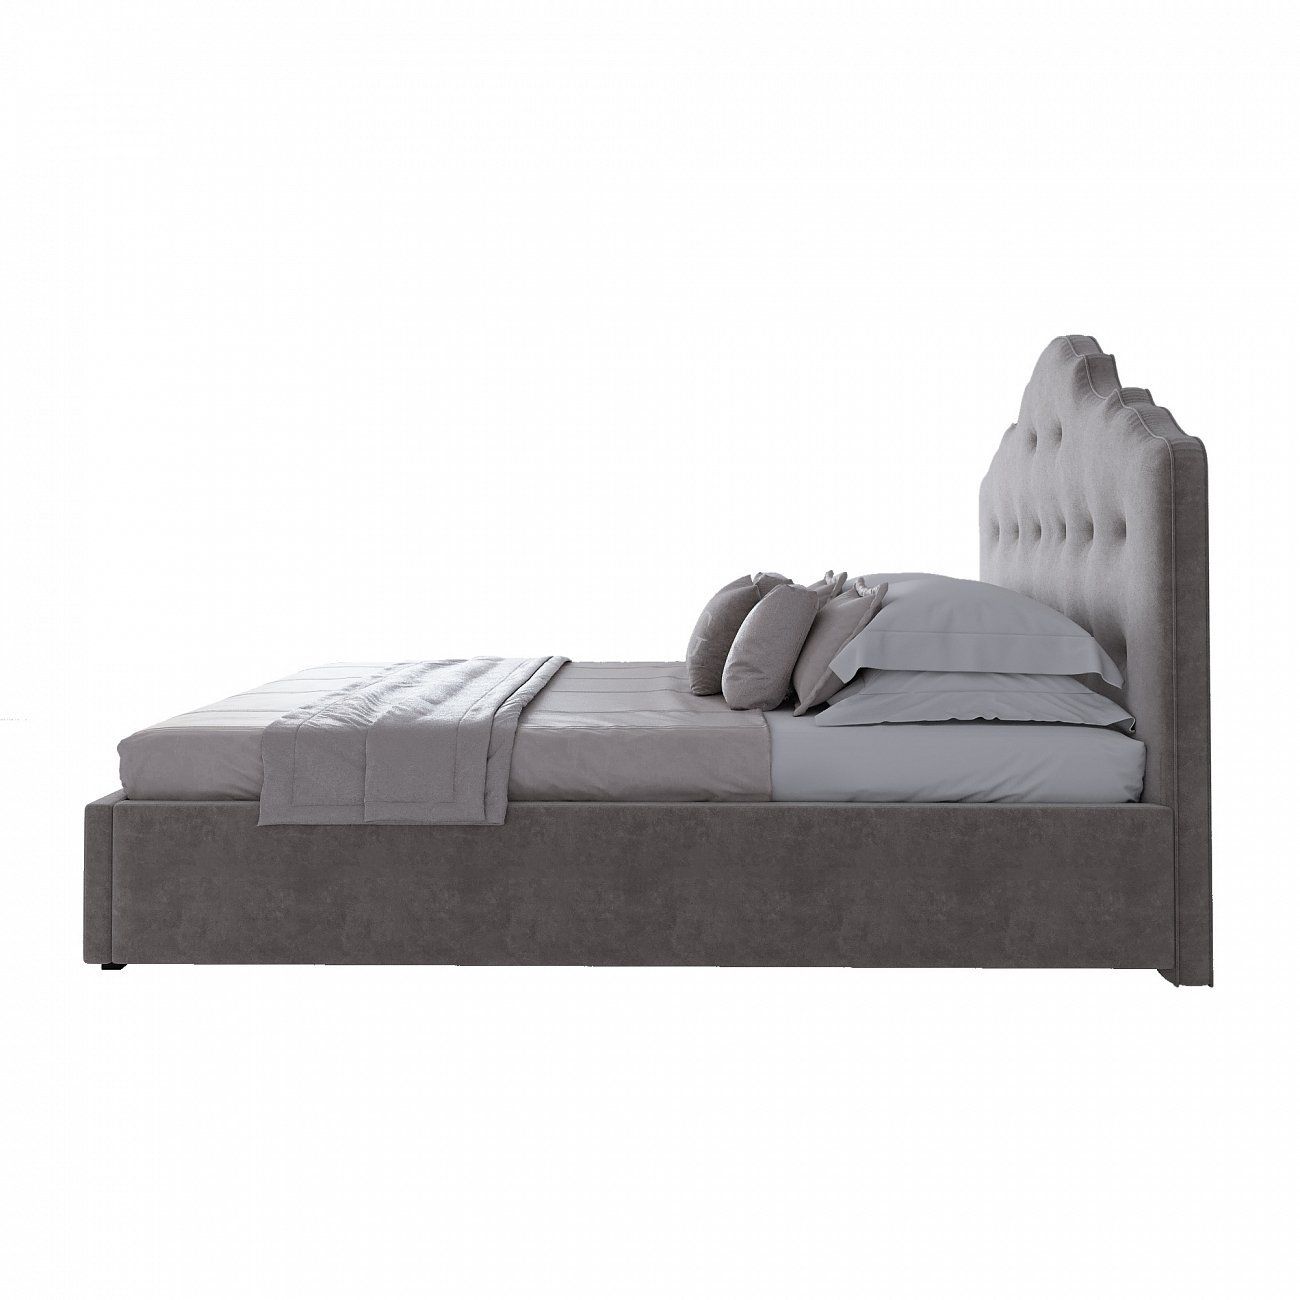 Double bed 160x200 cm brown-gray Palace